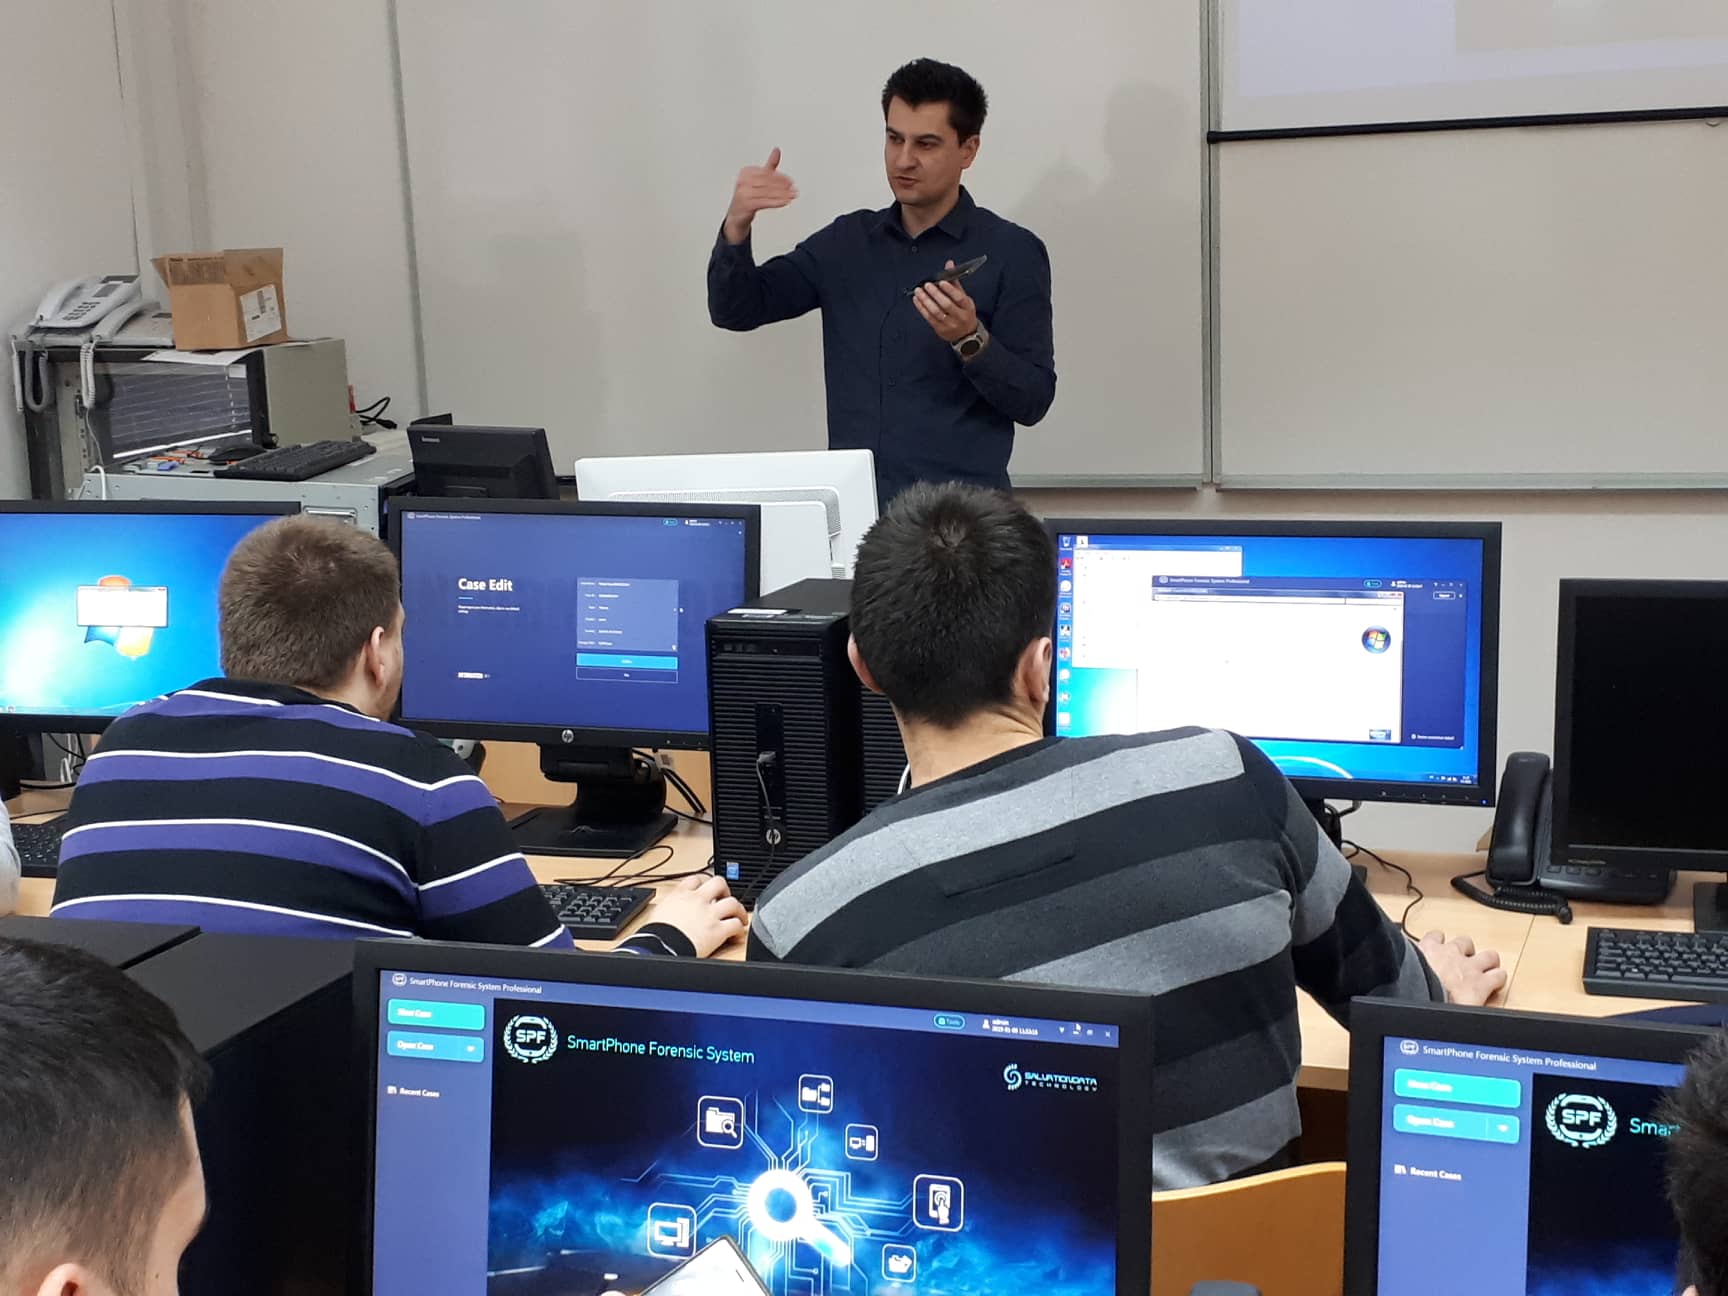 SalvationDATA's SPF(SmartPhone Forensic System Professional) has been listed as a training tool at the University of Zagreb